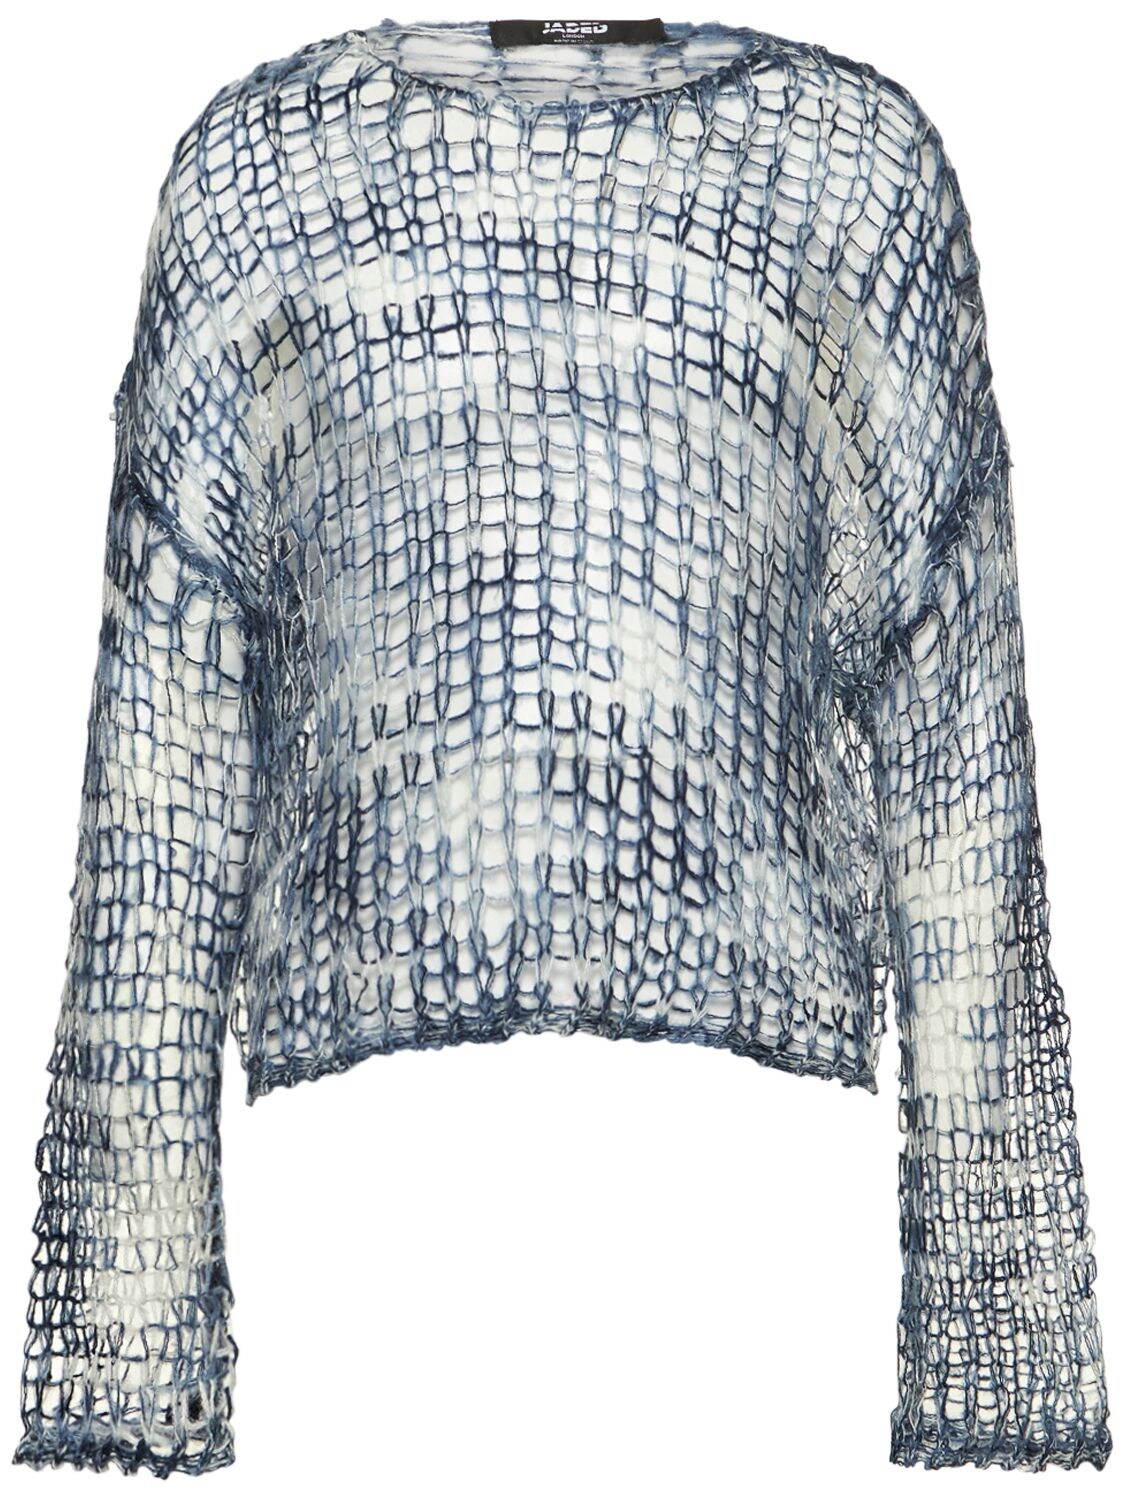 JADED LONDON Blue Ombre Twisted Knit Sweater